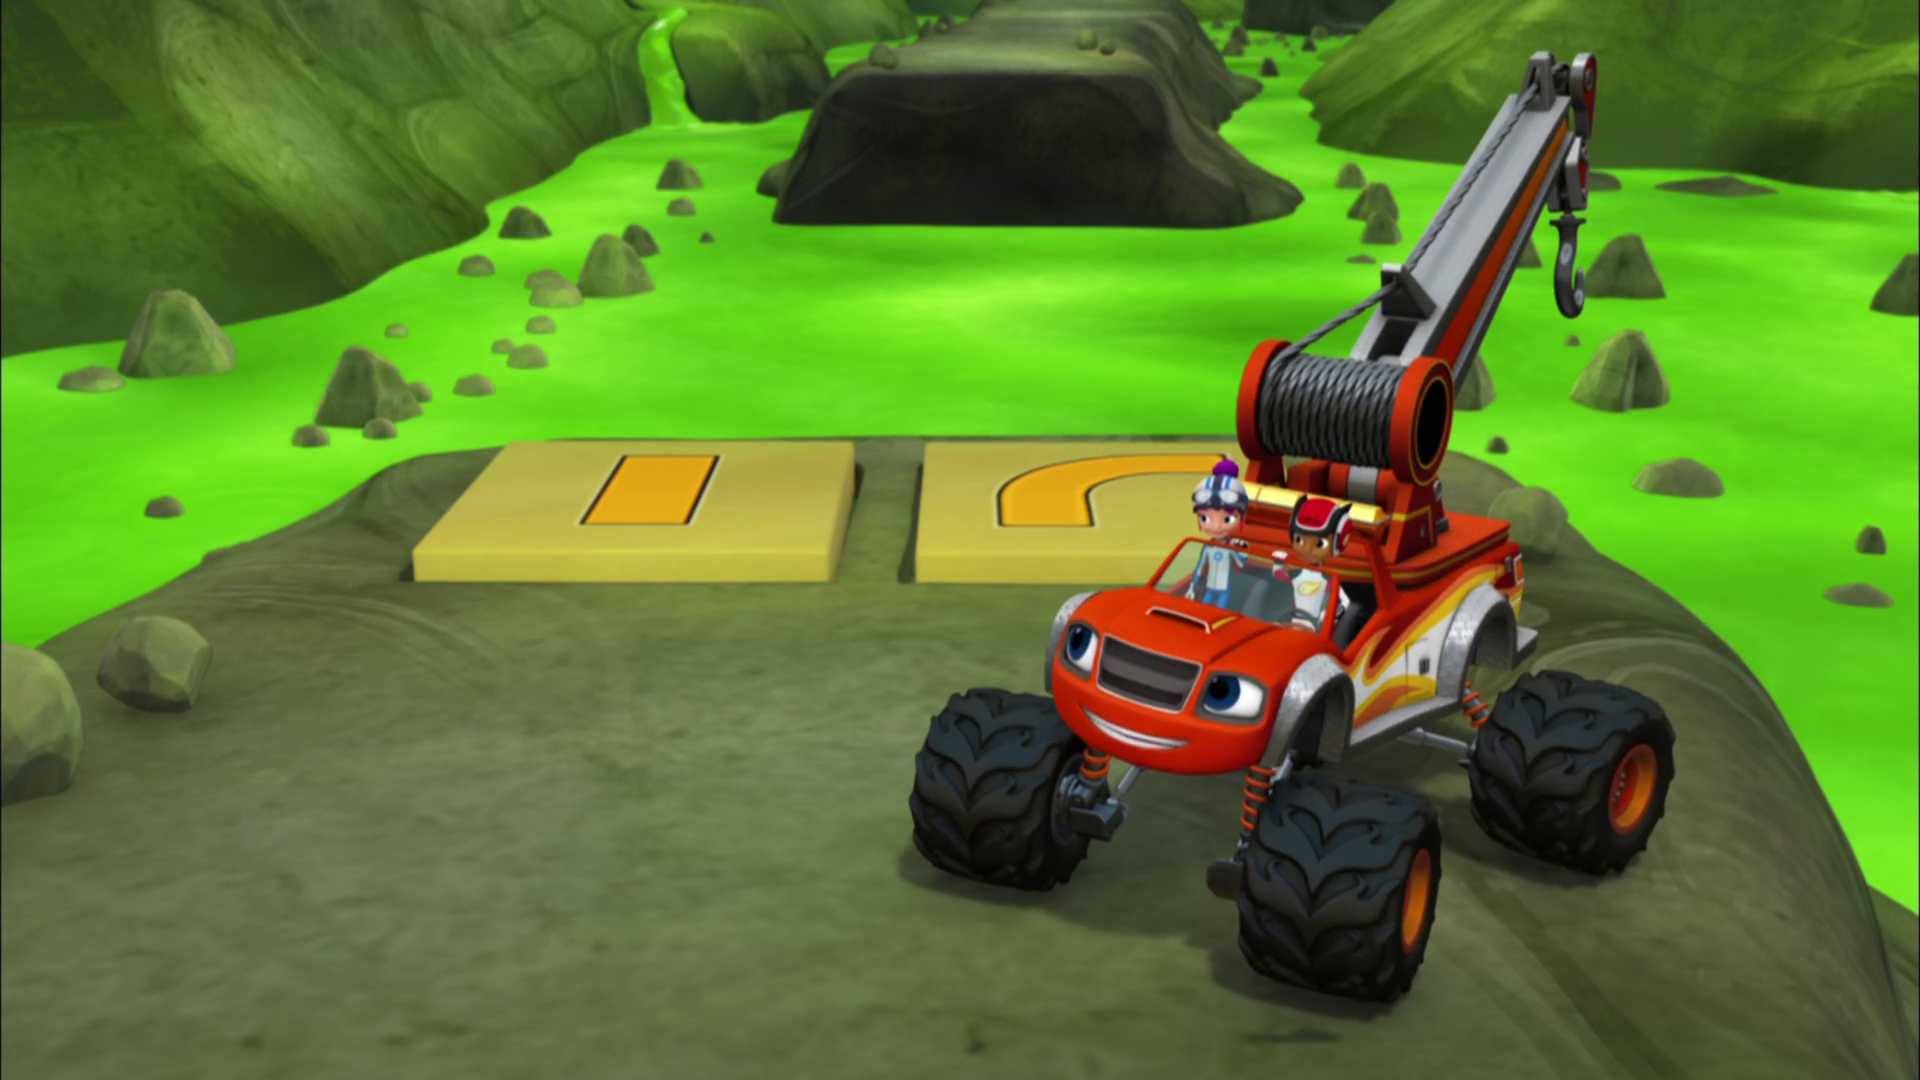 blaze and the monster machines tow truck